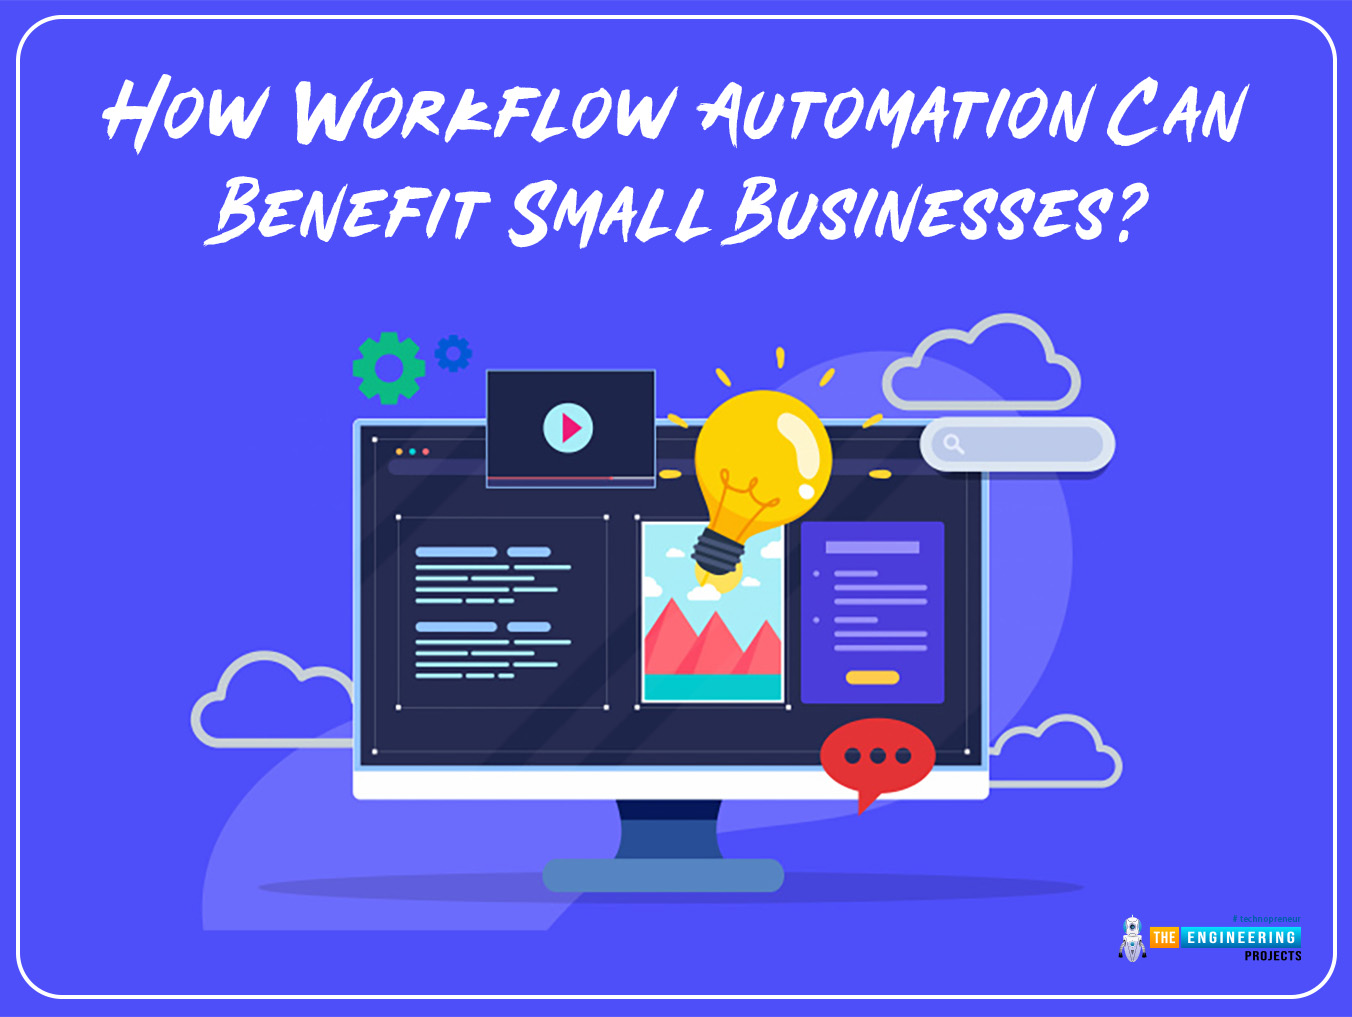 How Workflow Automation Can Benefit Small Businesses, Workflow Automation for small businesses, benefits of automating your business, Workflow Automation in small business, small industry Workflow Automation